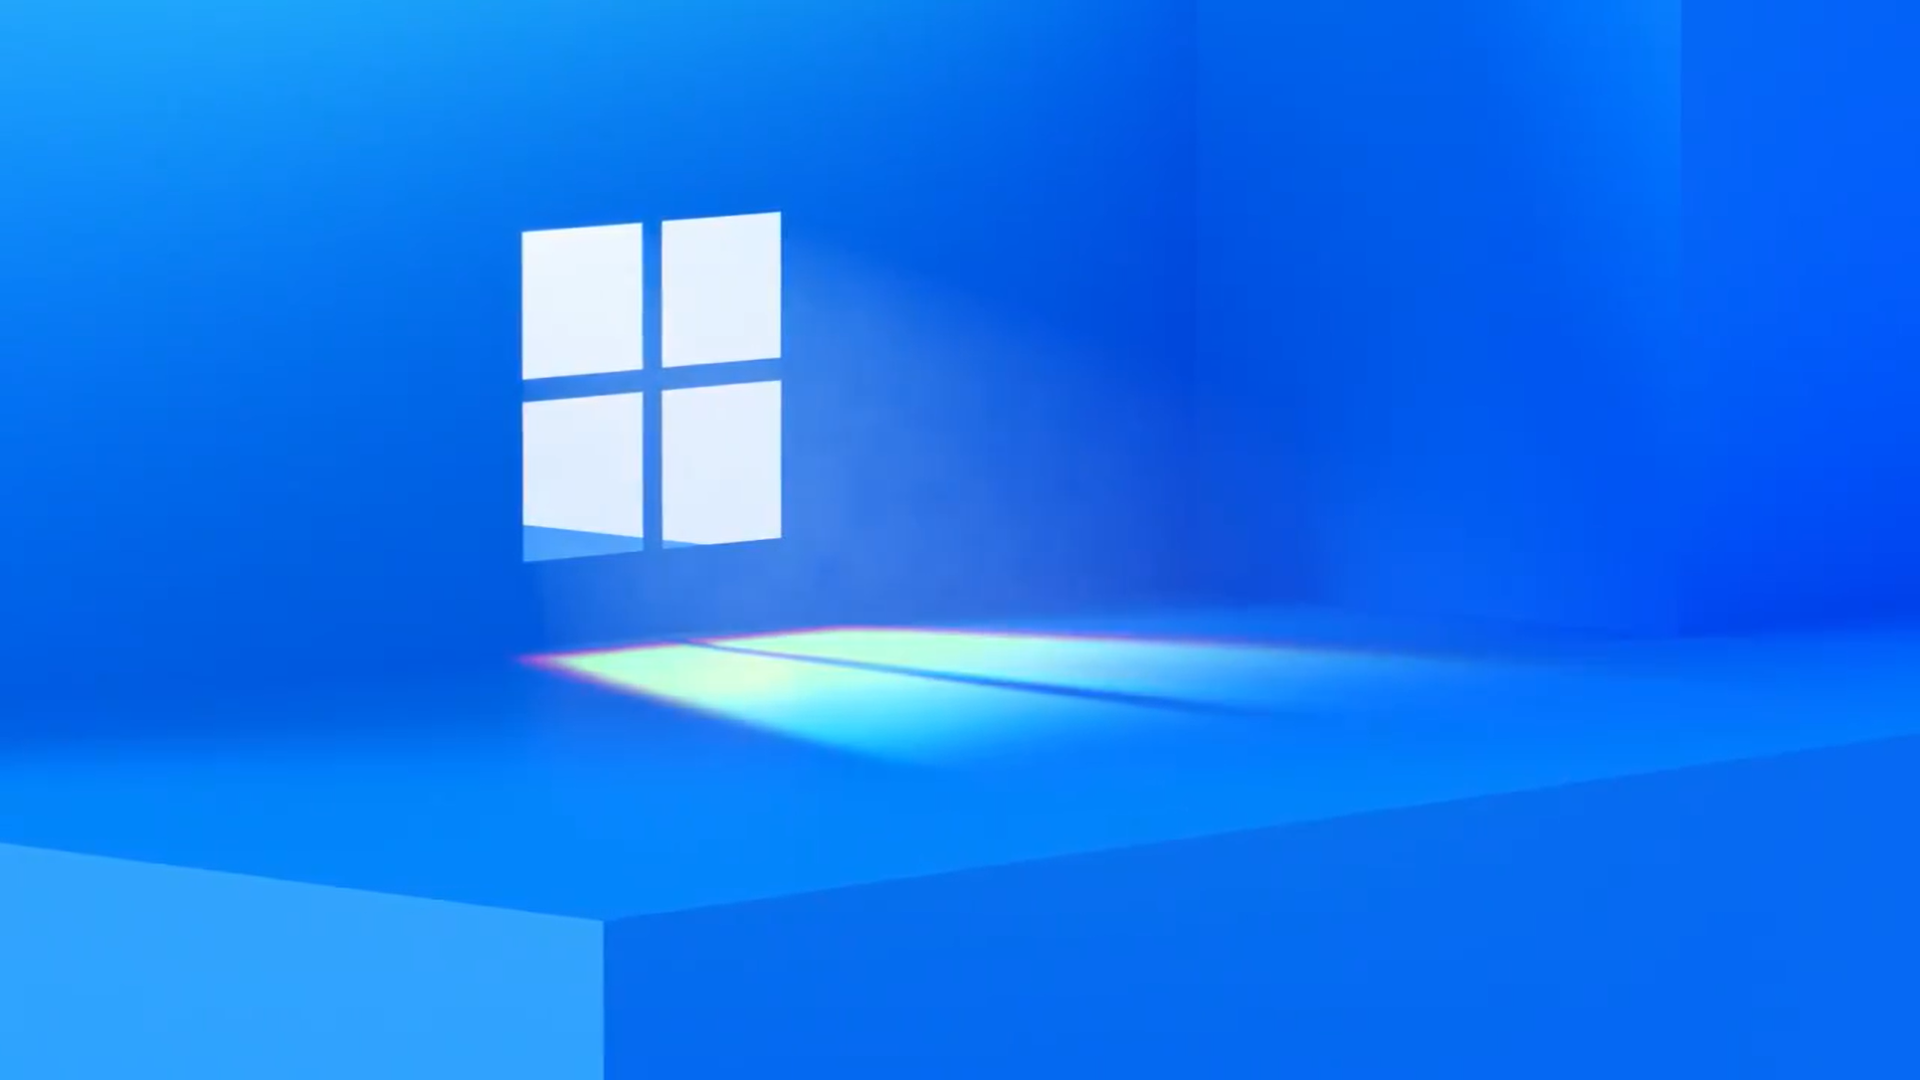 Windows 11 Style Abstract Wallpapers